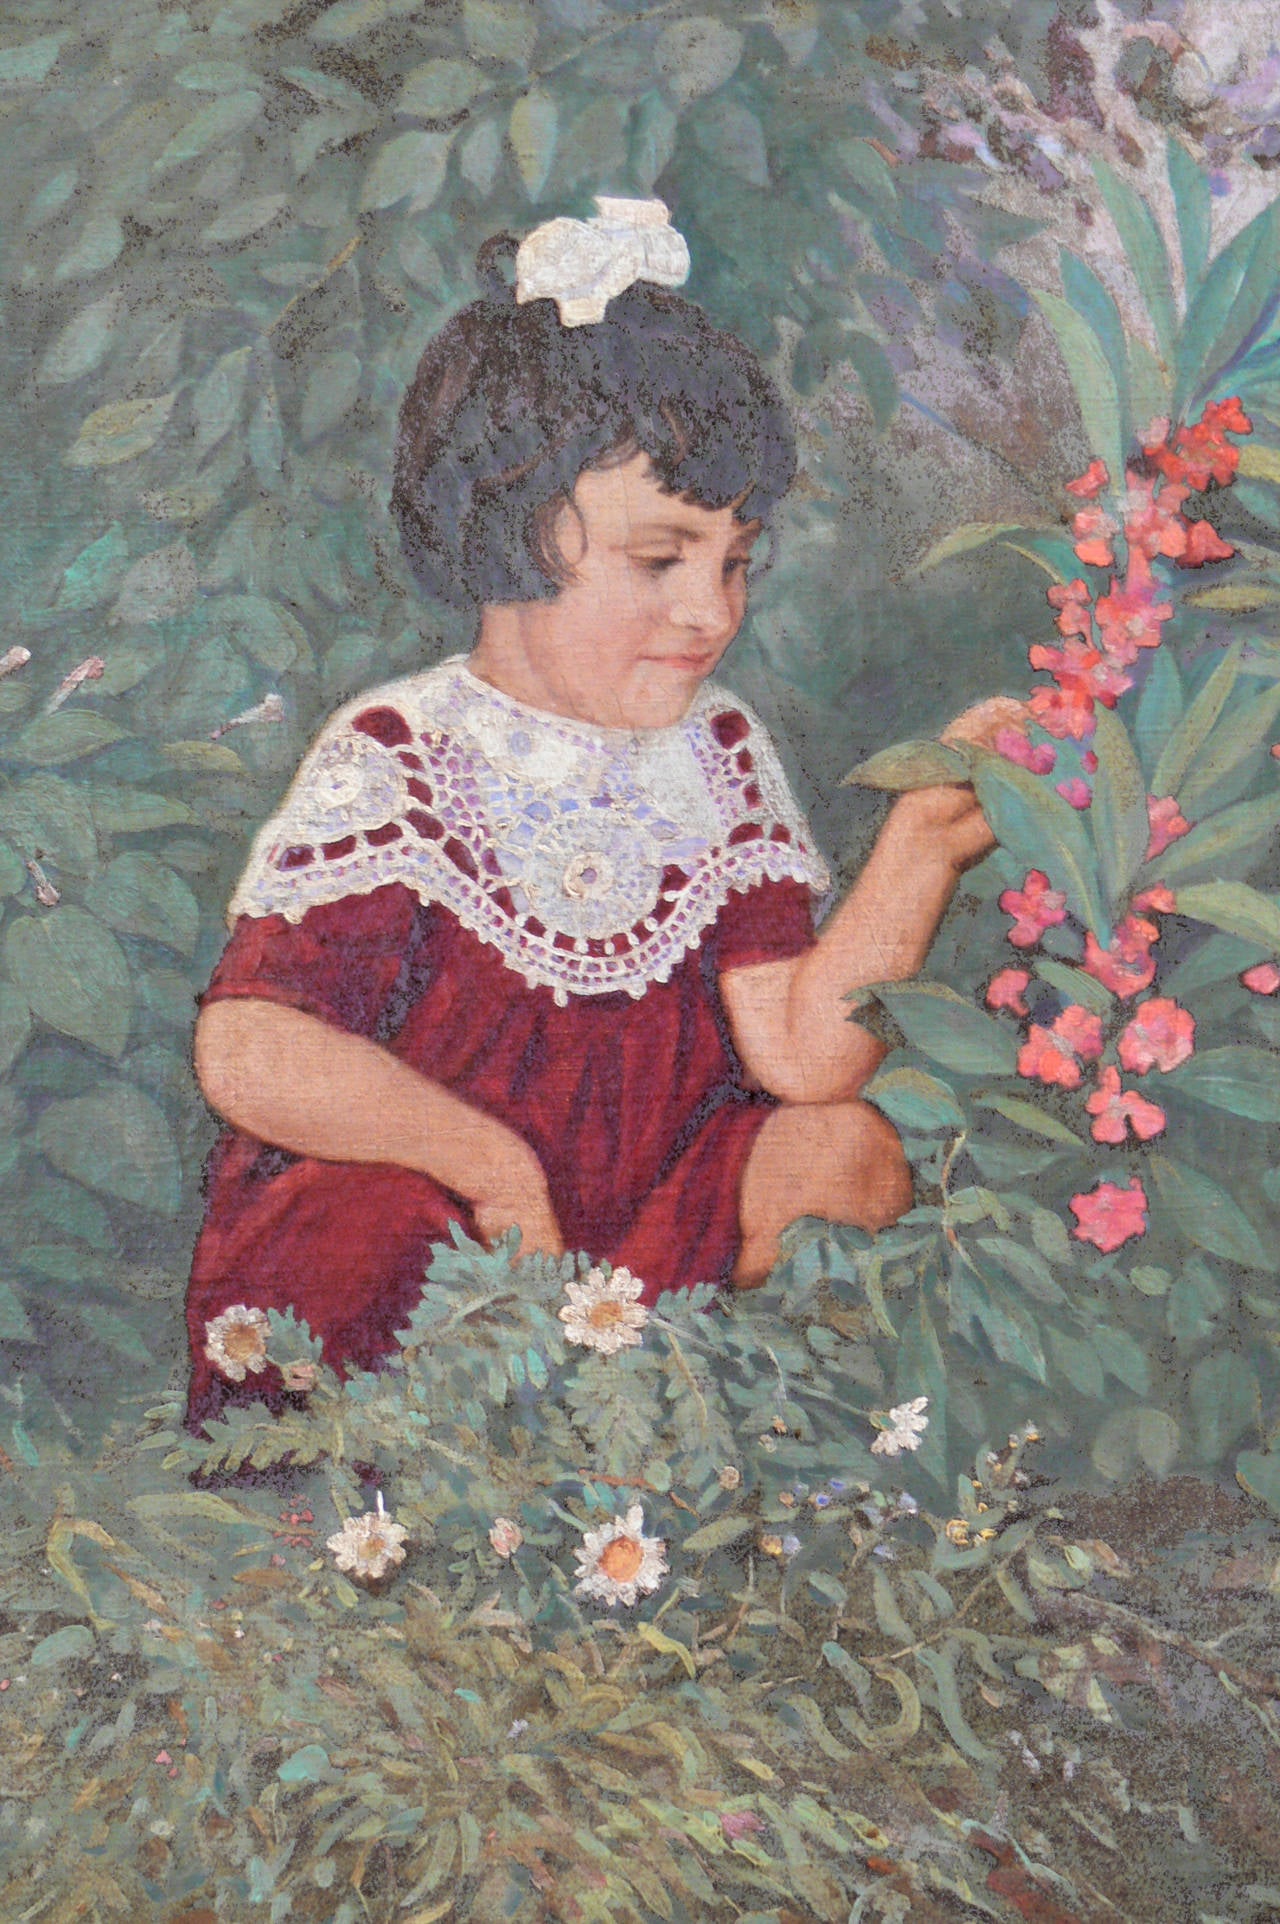 A. Shukov Figurative Painting - Oil Painting on Canvas "A Little Girl with Flowers in a Garden", 1952